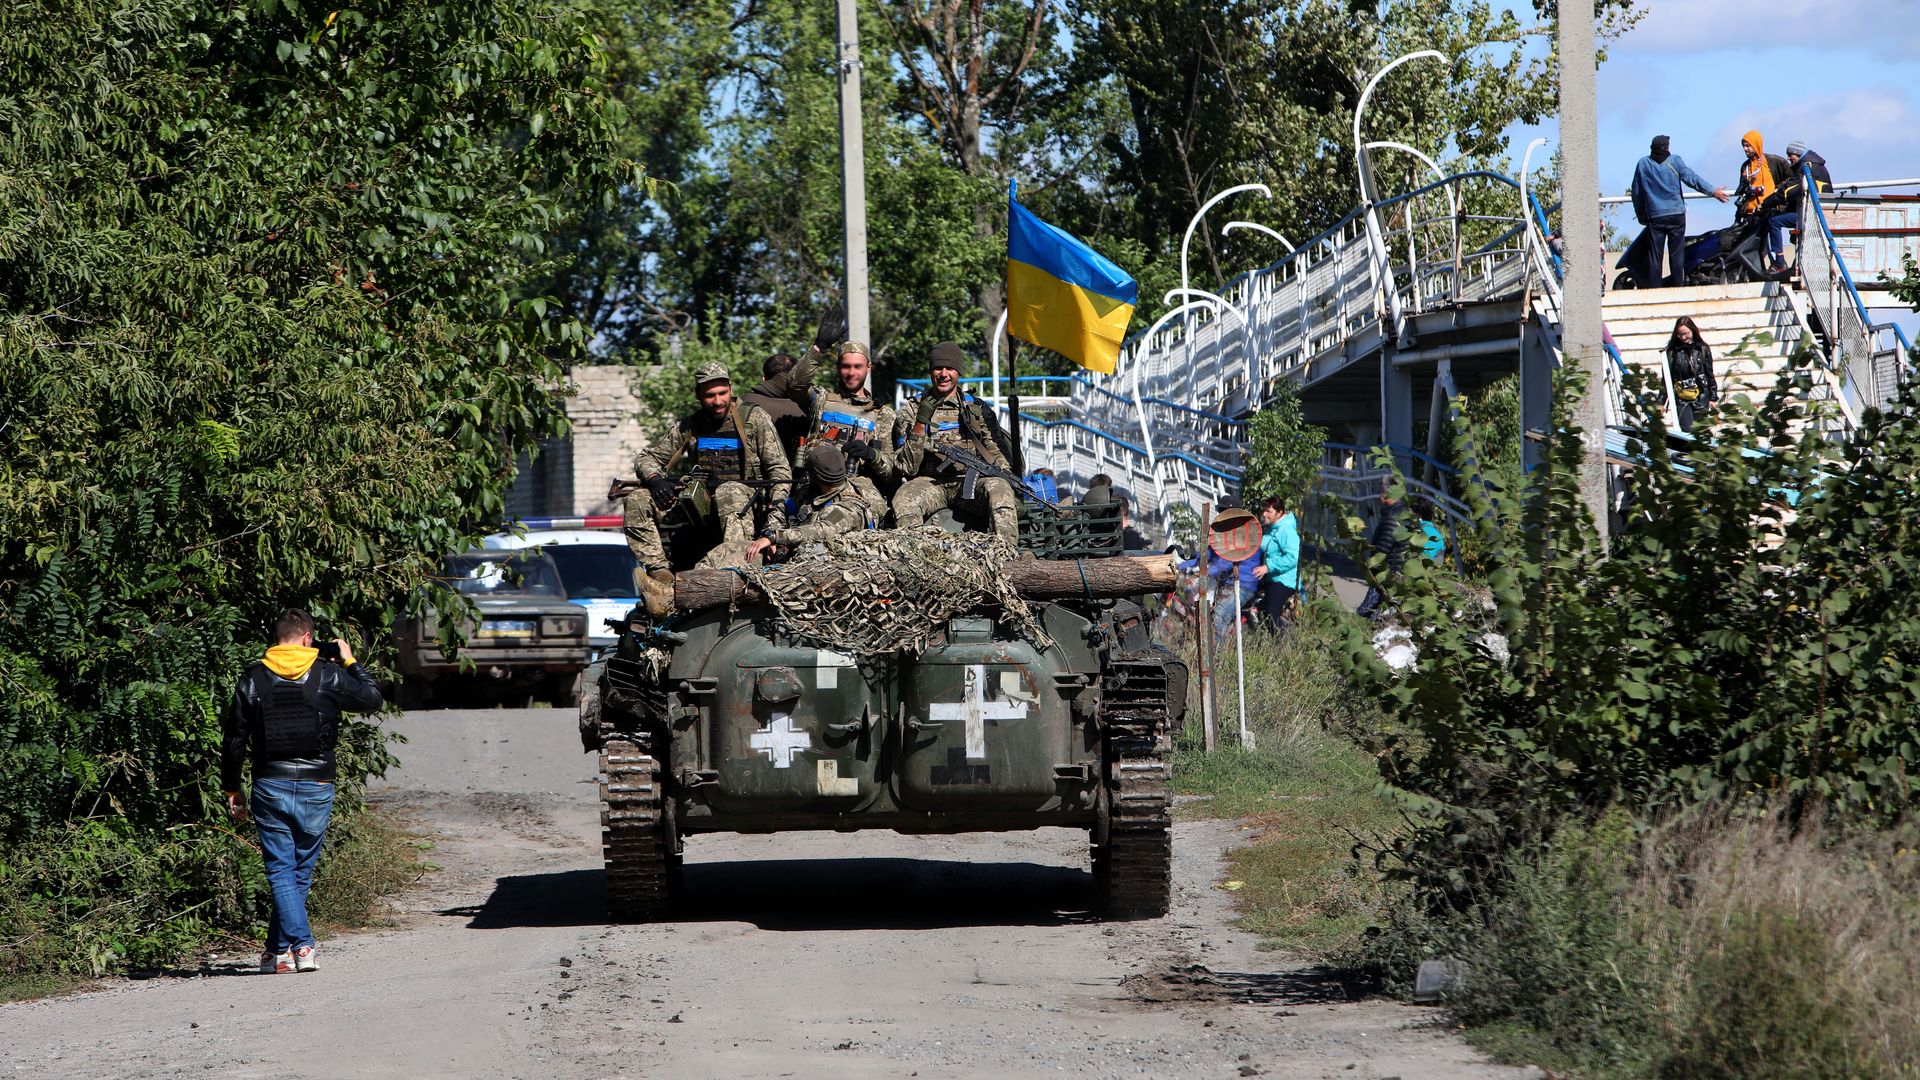 Ukrainian servicemen ride on top of a military vehicle in Izium on Sept. 19.